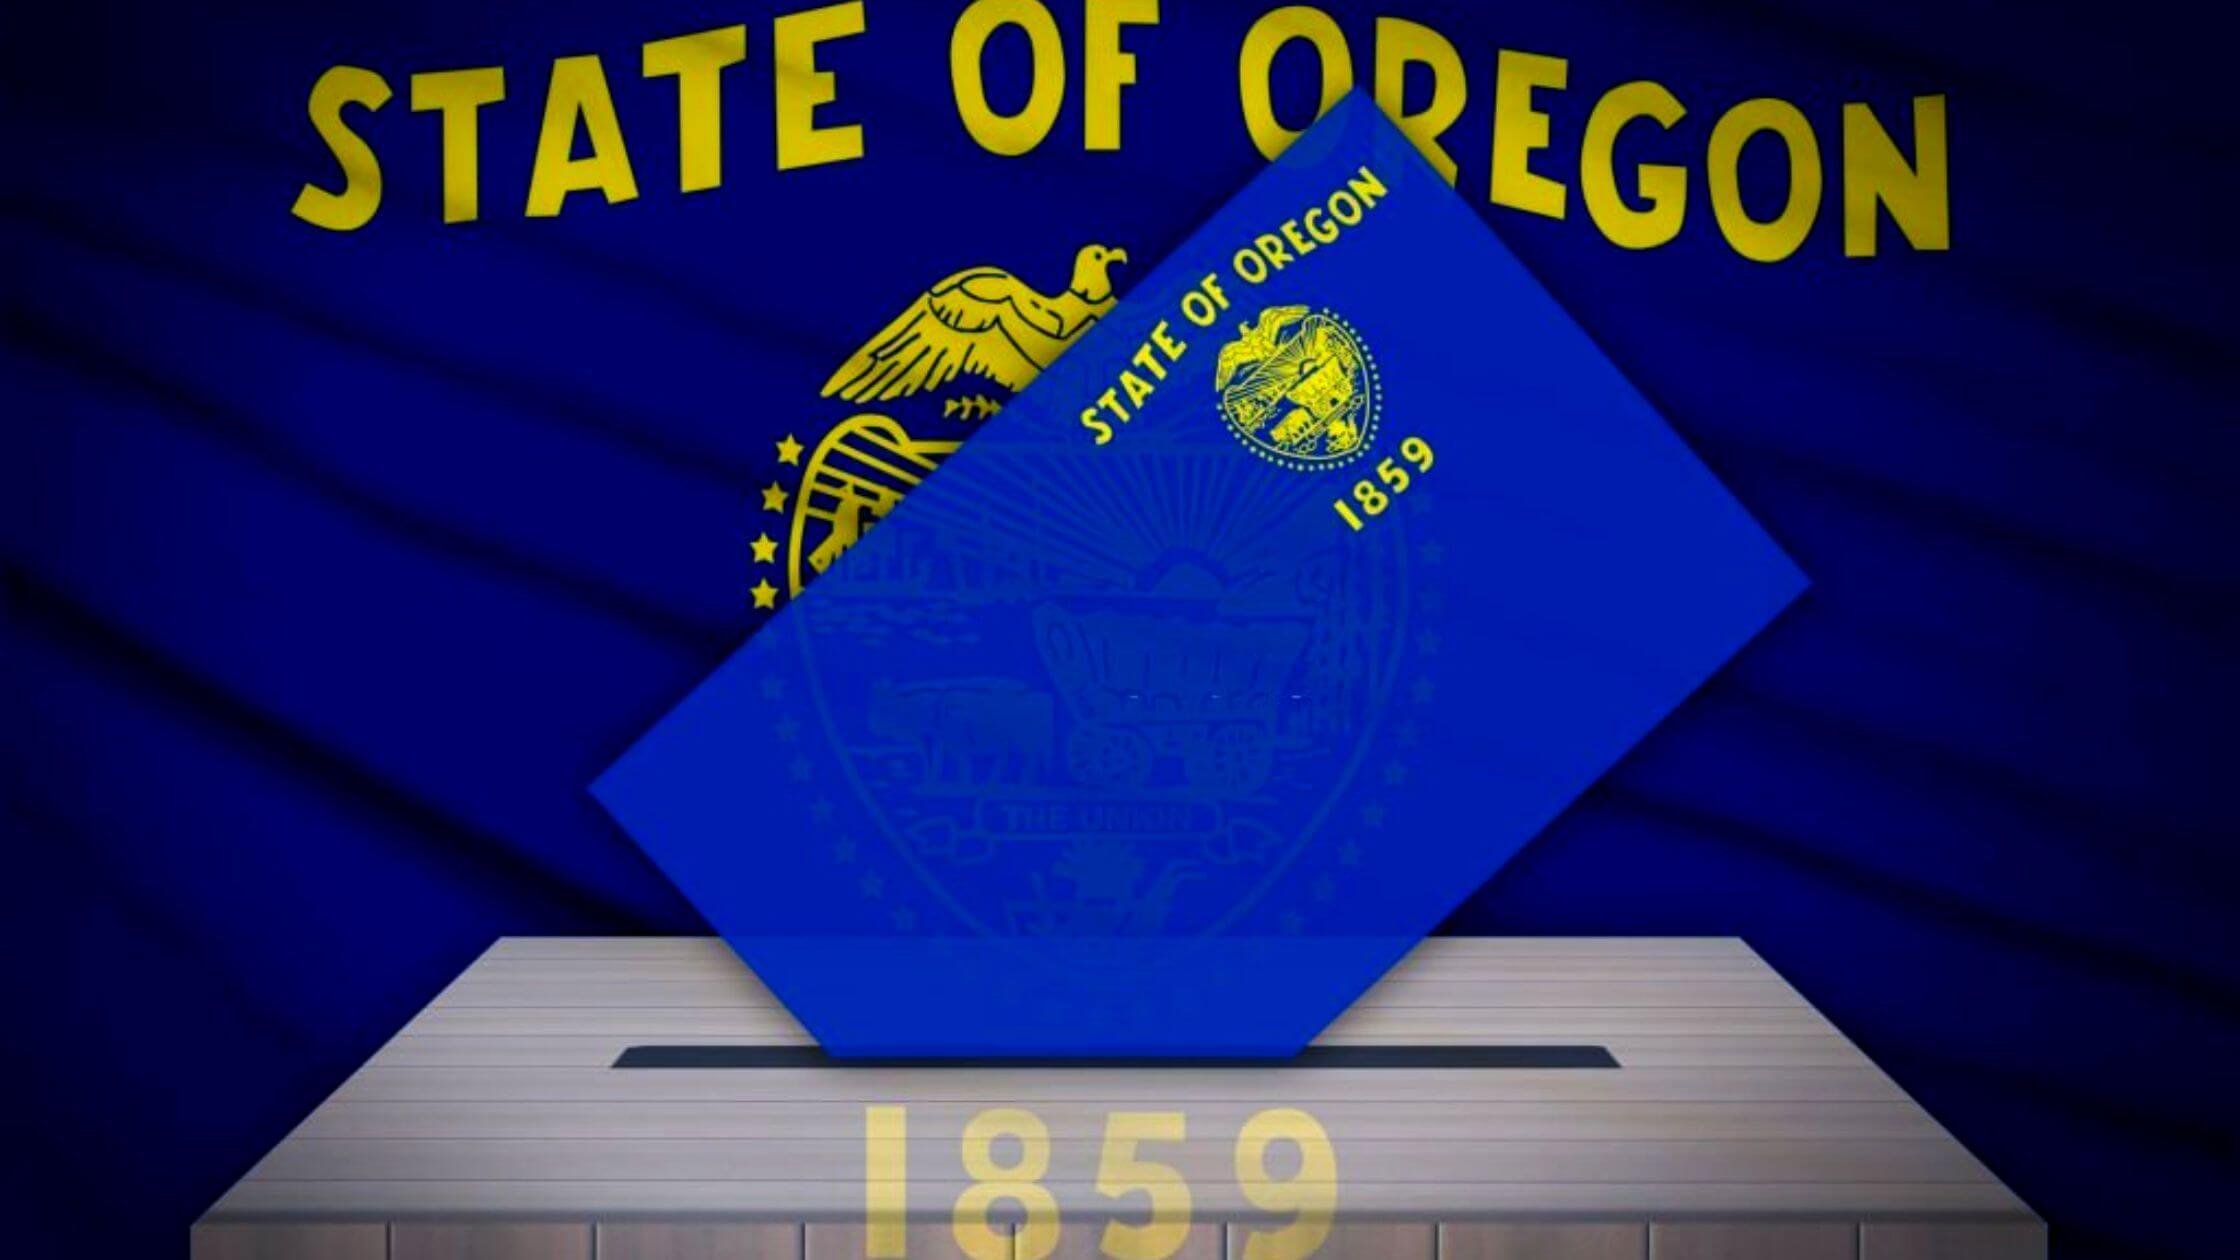 Gun Control And Healthcare Initiatives Are Up For Vote In Oregon